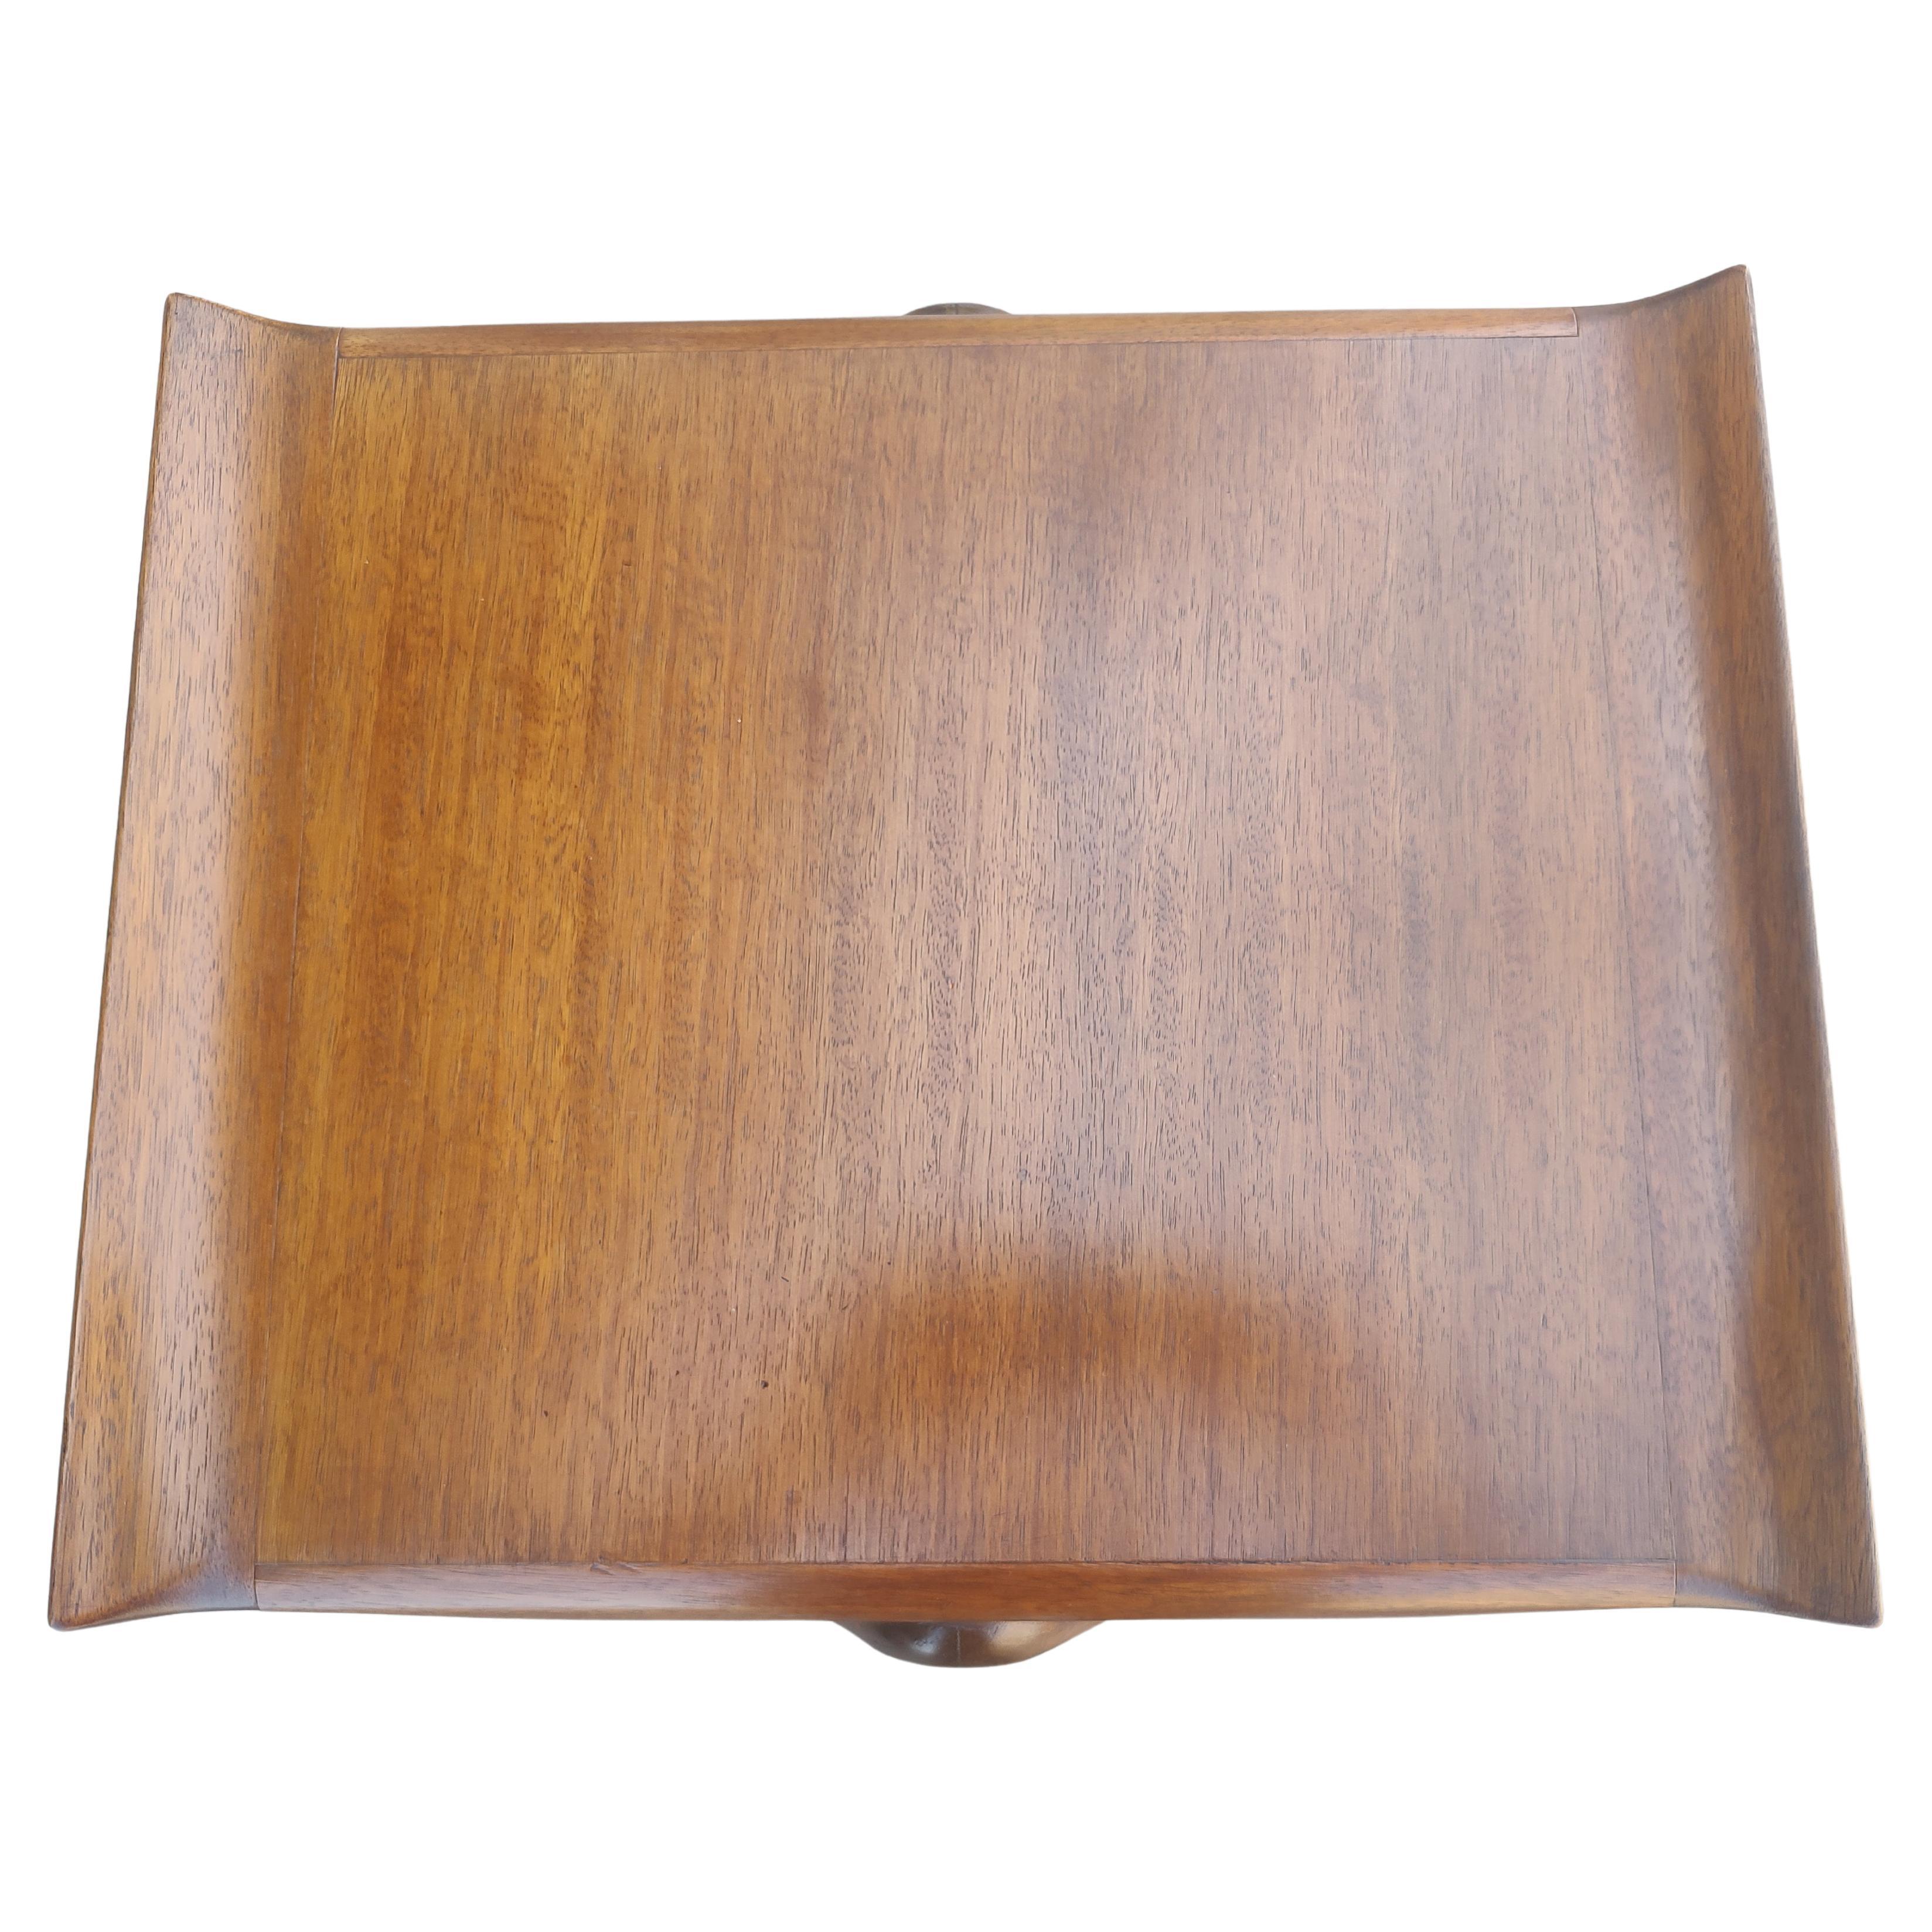 Italian Mid Century Modern End Sofa Walnut Table Attributed to Ico & Luisa Parisi C1955 For Sale